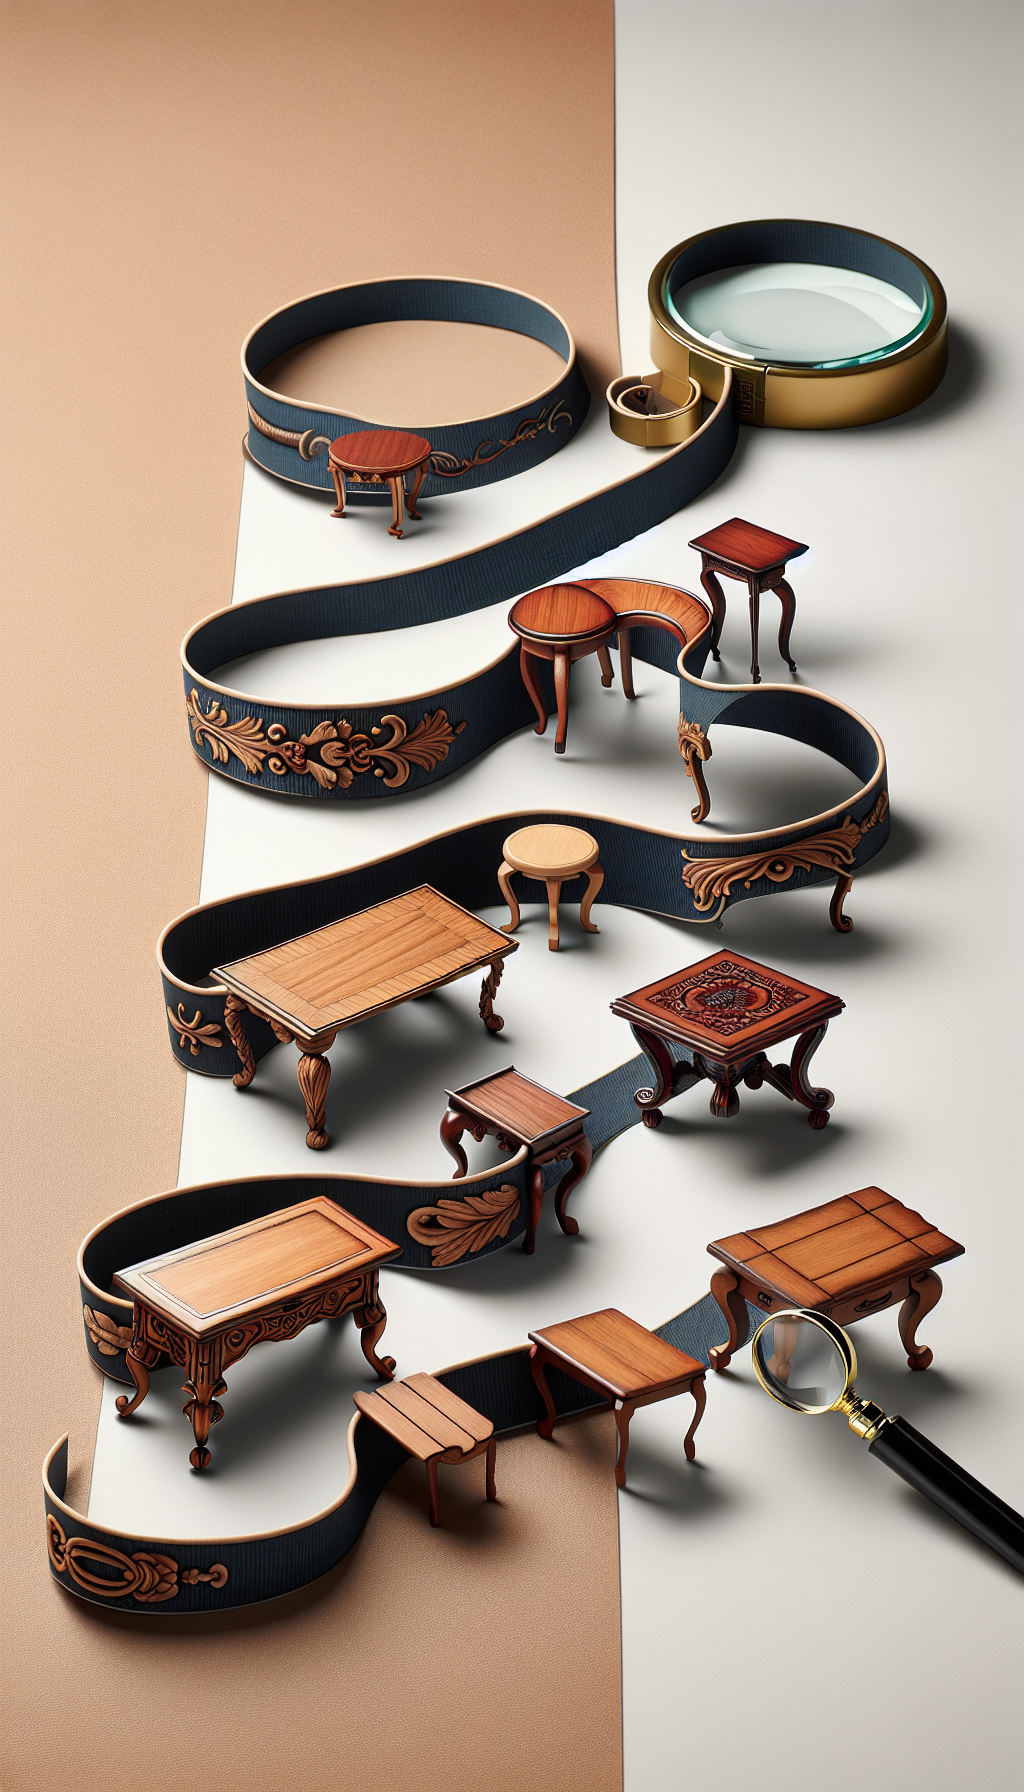 An artistic time-ribbon unfurls, presenting an array of distinct drop-leaf table miniatures, each embodying key design features from different eras such as Baroque curves, Victorian ornamentation, and sleek Mid-century lines. The ribbon twists, showcasing each style's unique leg and leaf mechanisms, while a monocled magnifying glass hovers over, symbolizing the scrutiny needed for identification.